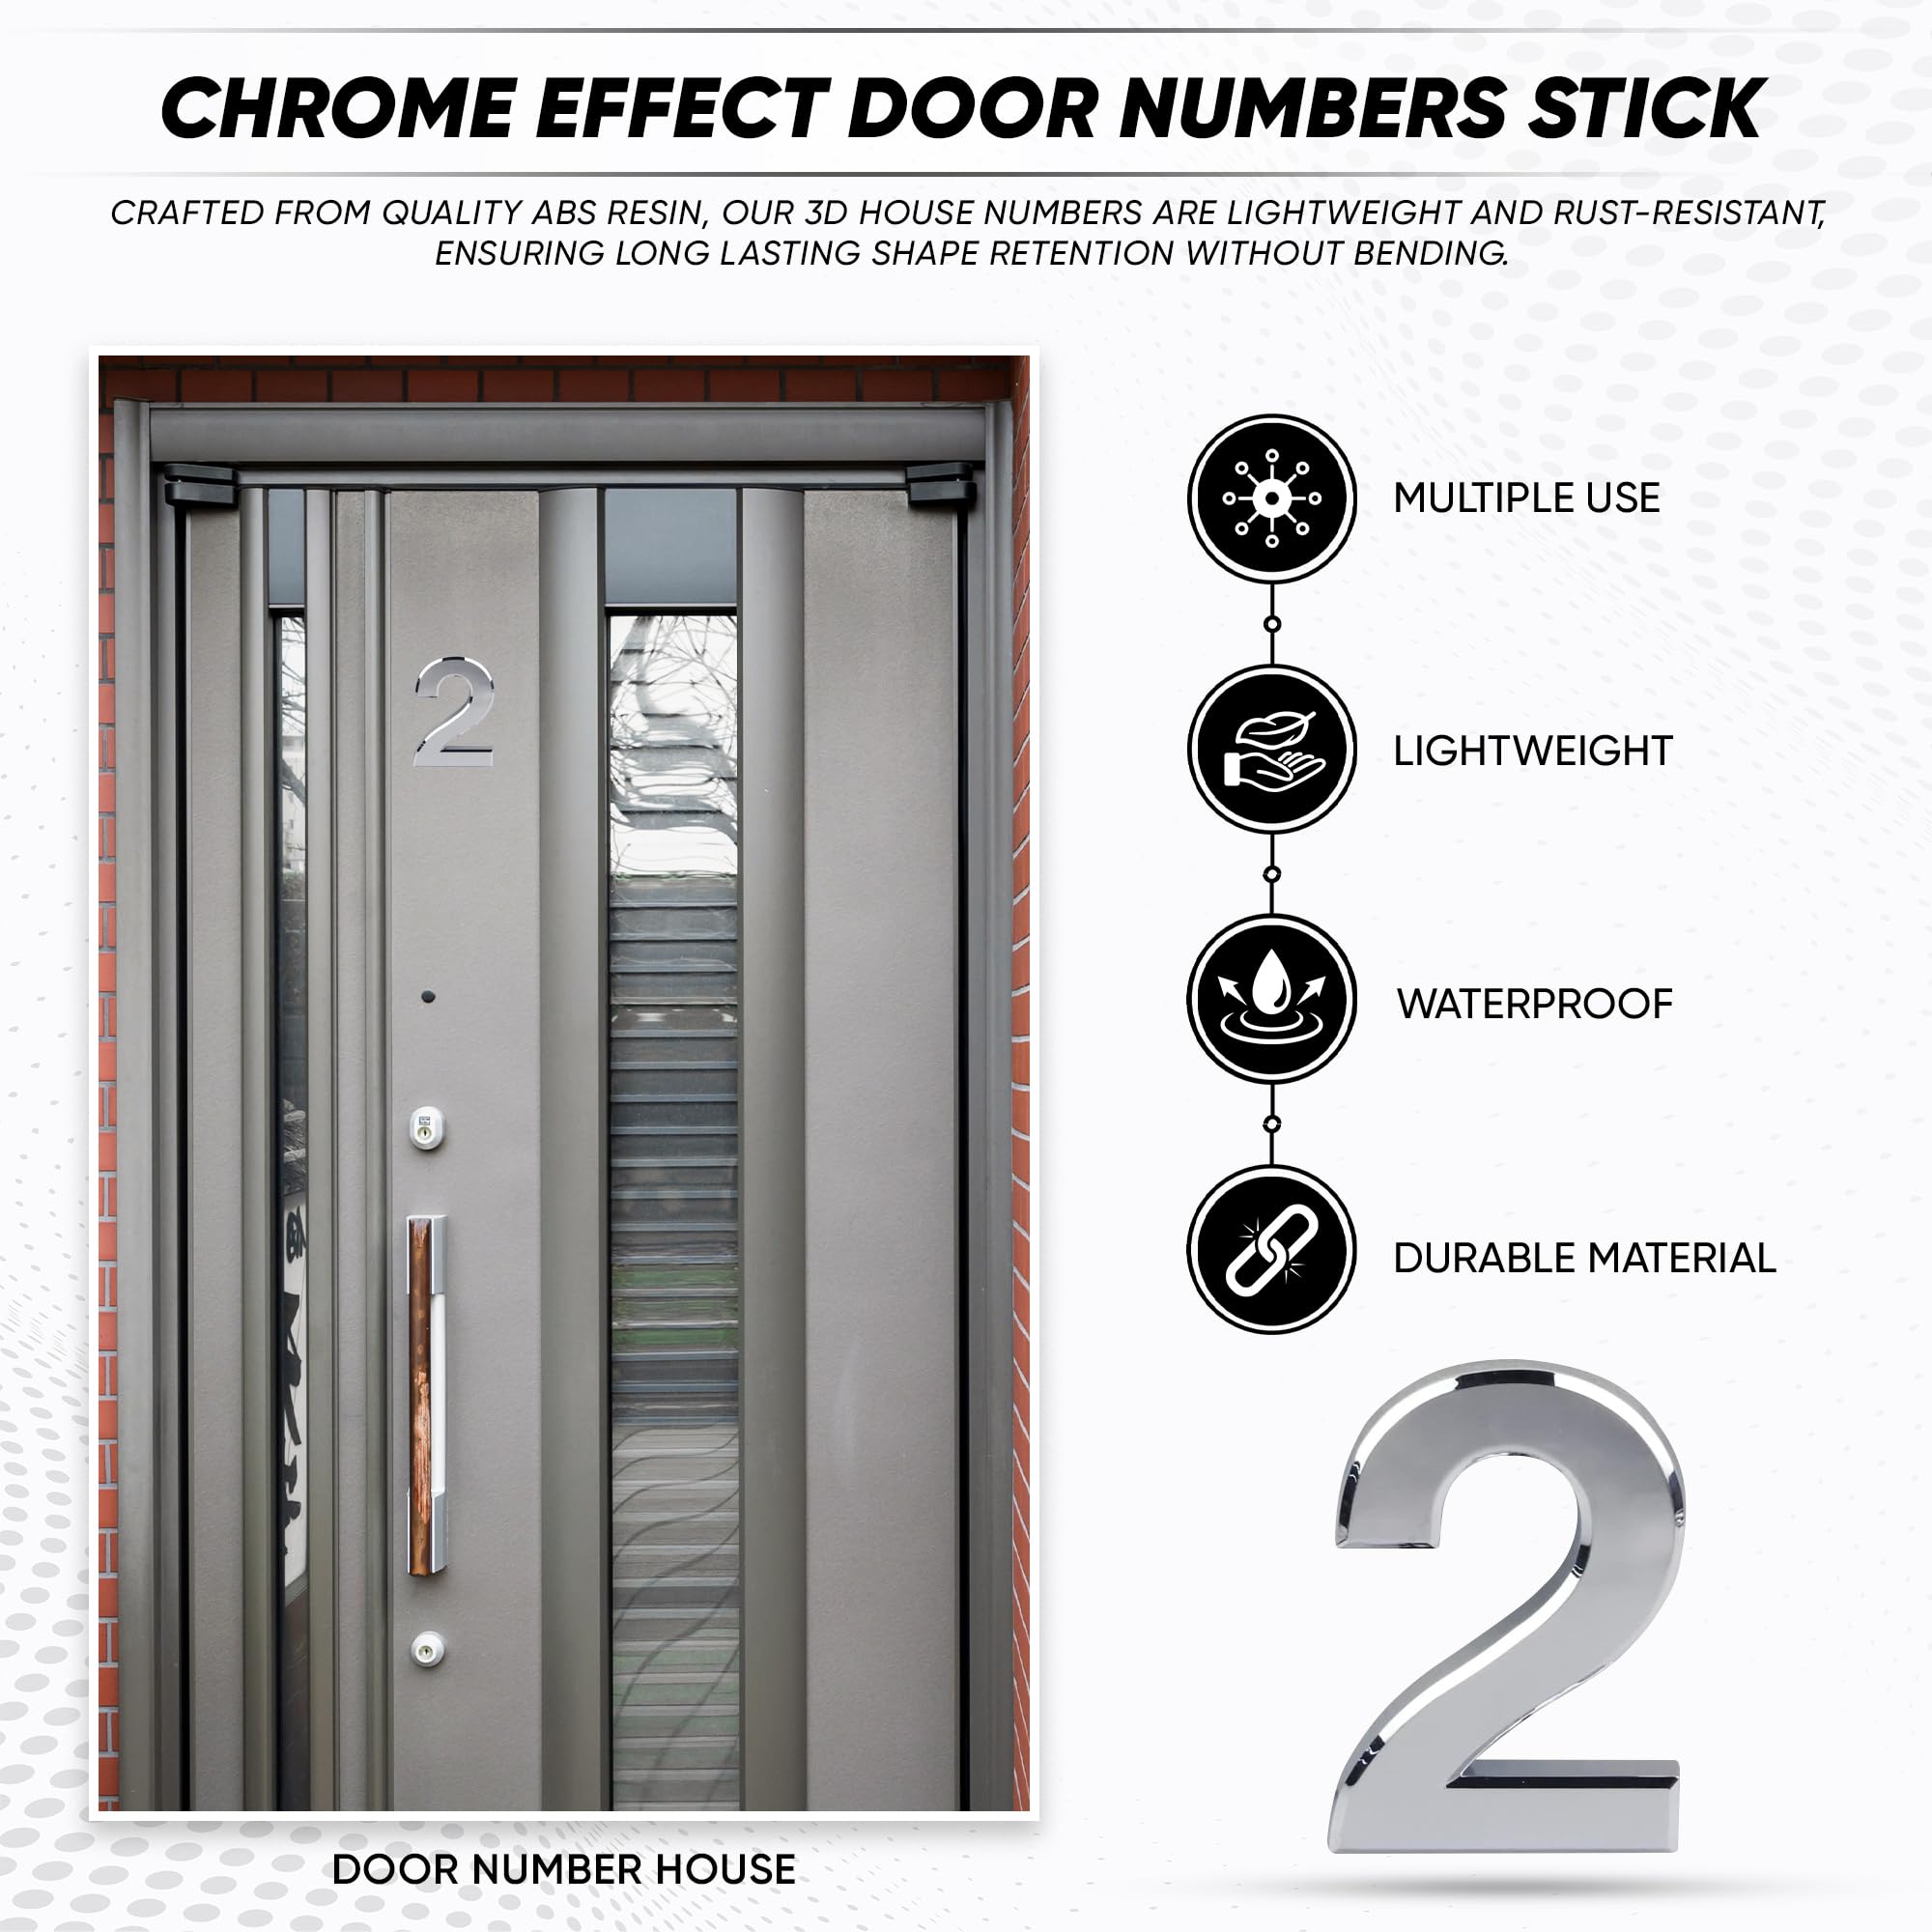 3'' Chrome Effect Door Numbers 0-99 Stick On Door Number House Numbers ABS Self Adhesive Silver 3D House Numbers For Doors, Mail Boxes, Hotel Rooms Door Number Stickers (2)